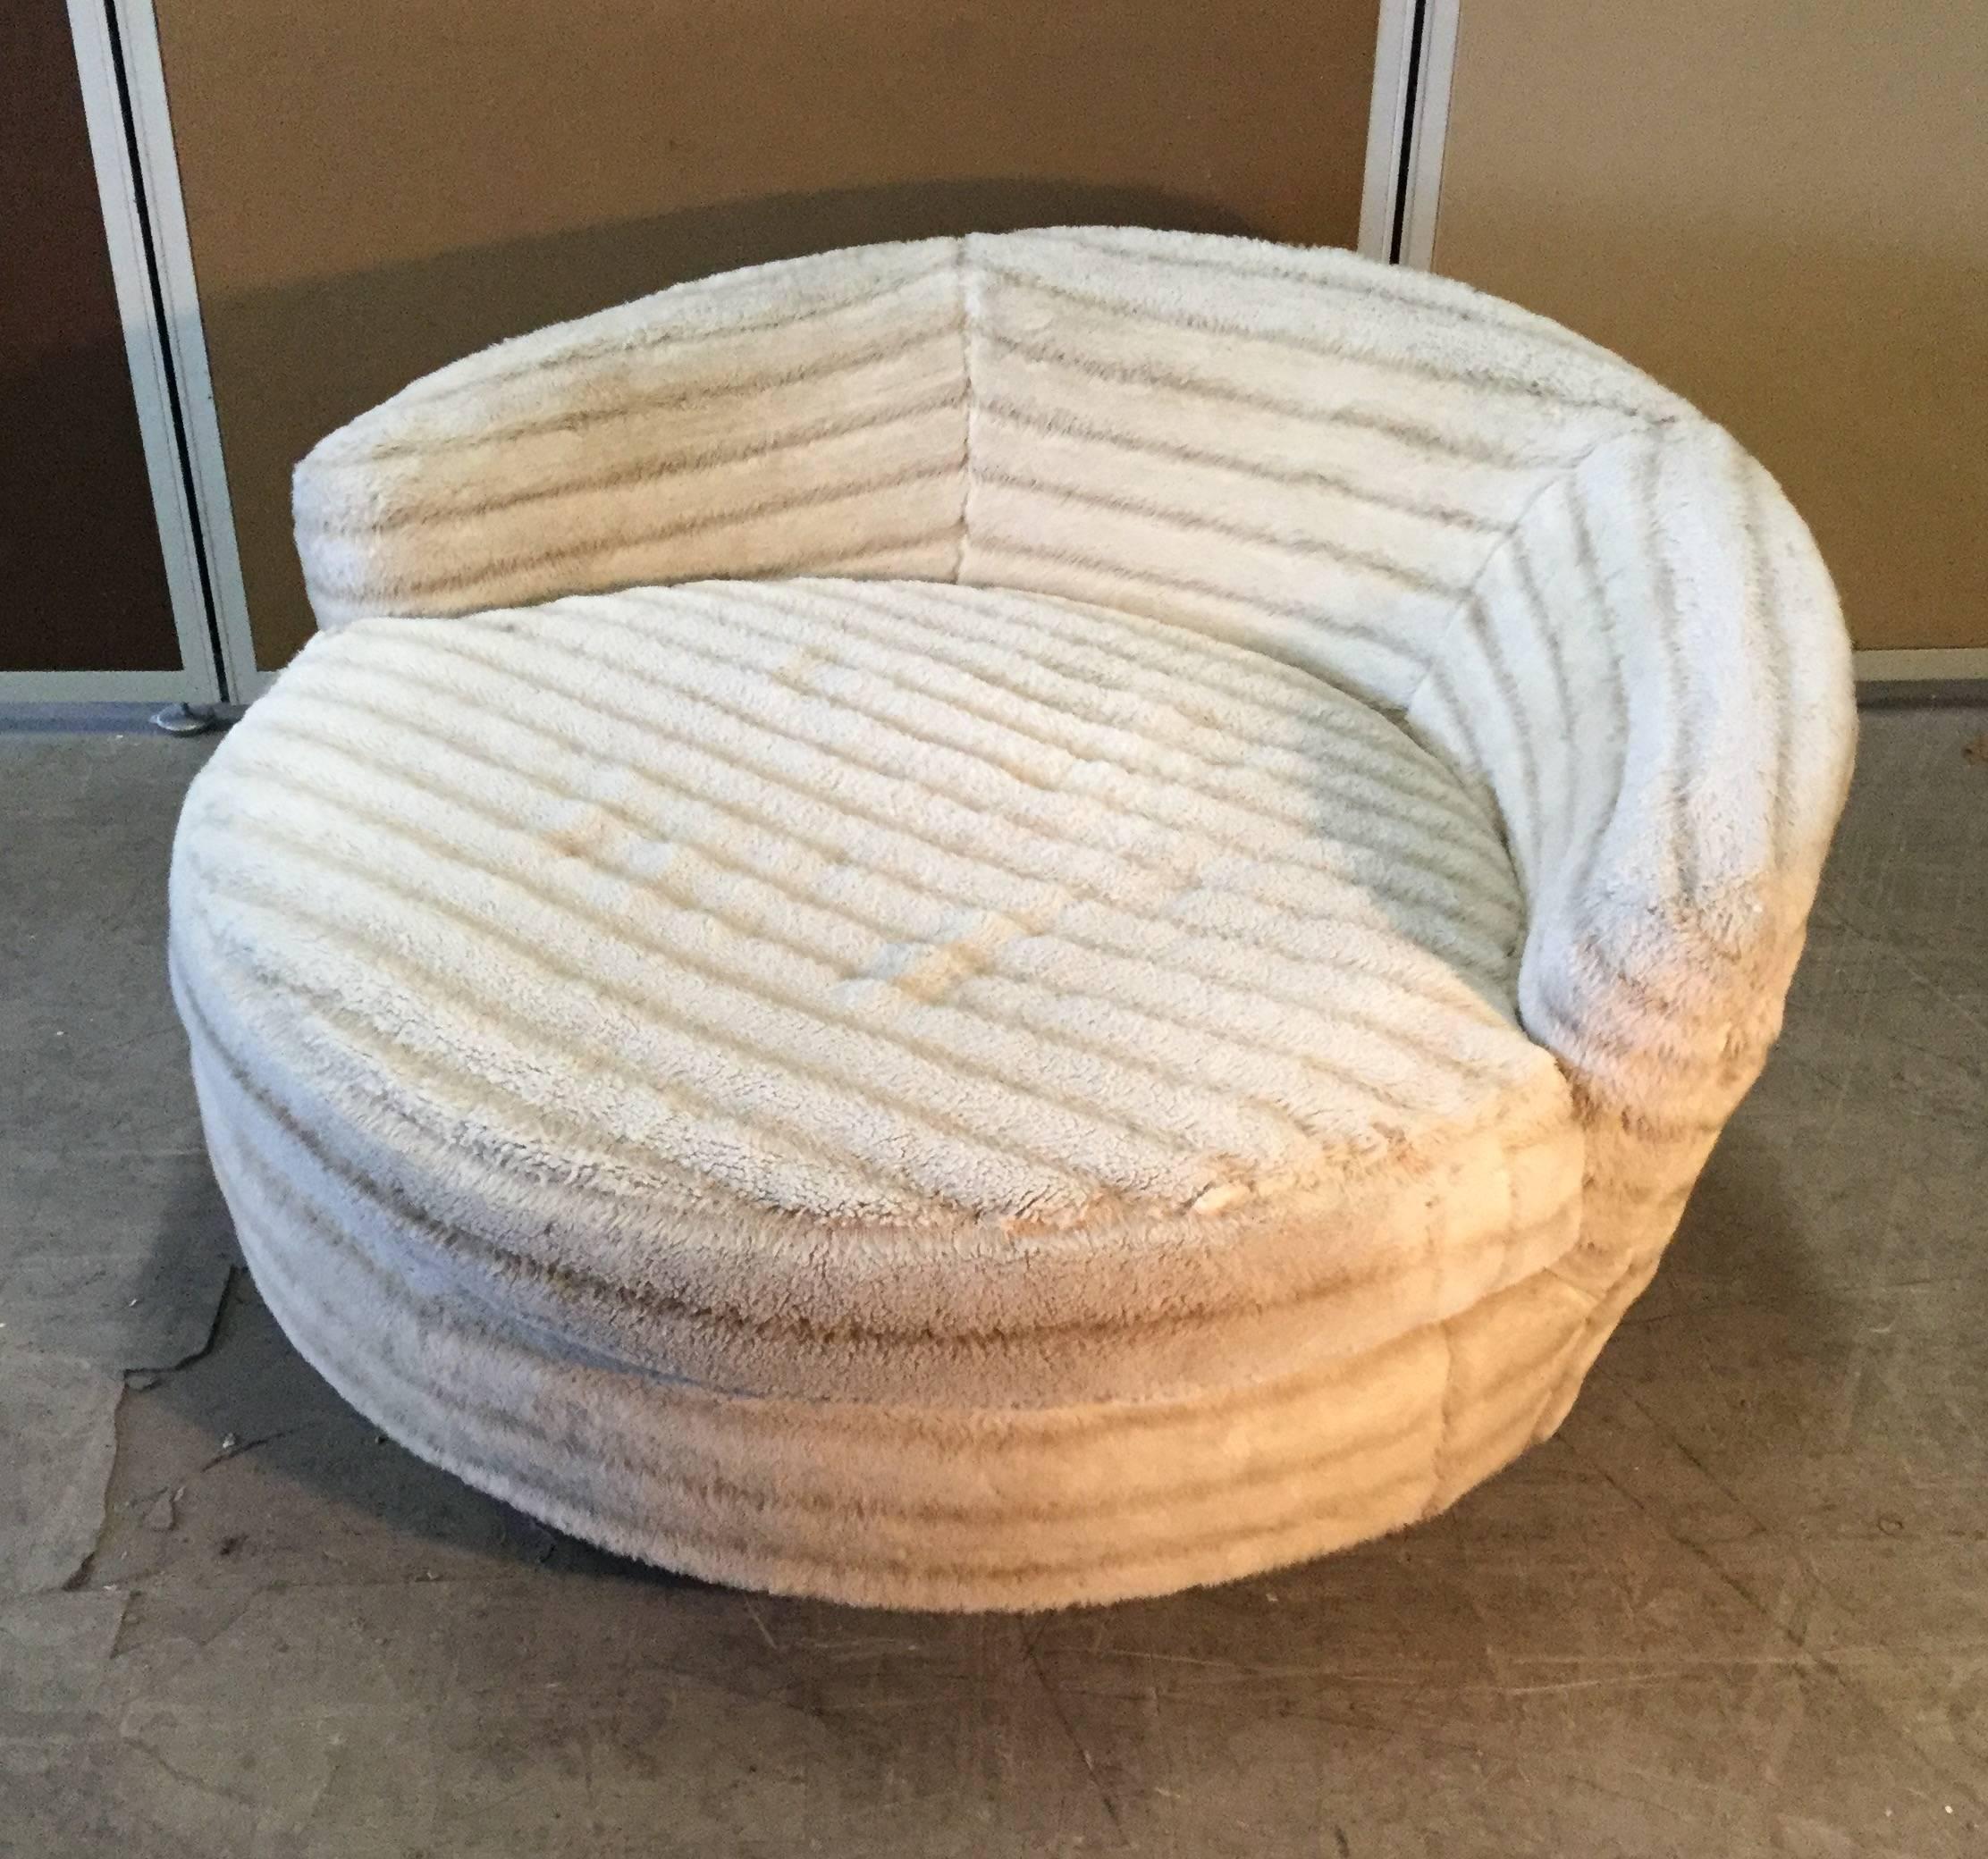 Large round lounge chair manner of Milo Baughman, Adrian Pearsall. Classic modernist form. Retains original fun fur fabric upholstery.